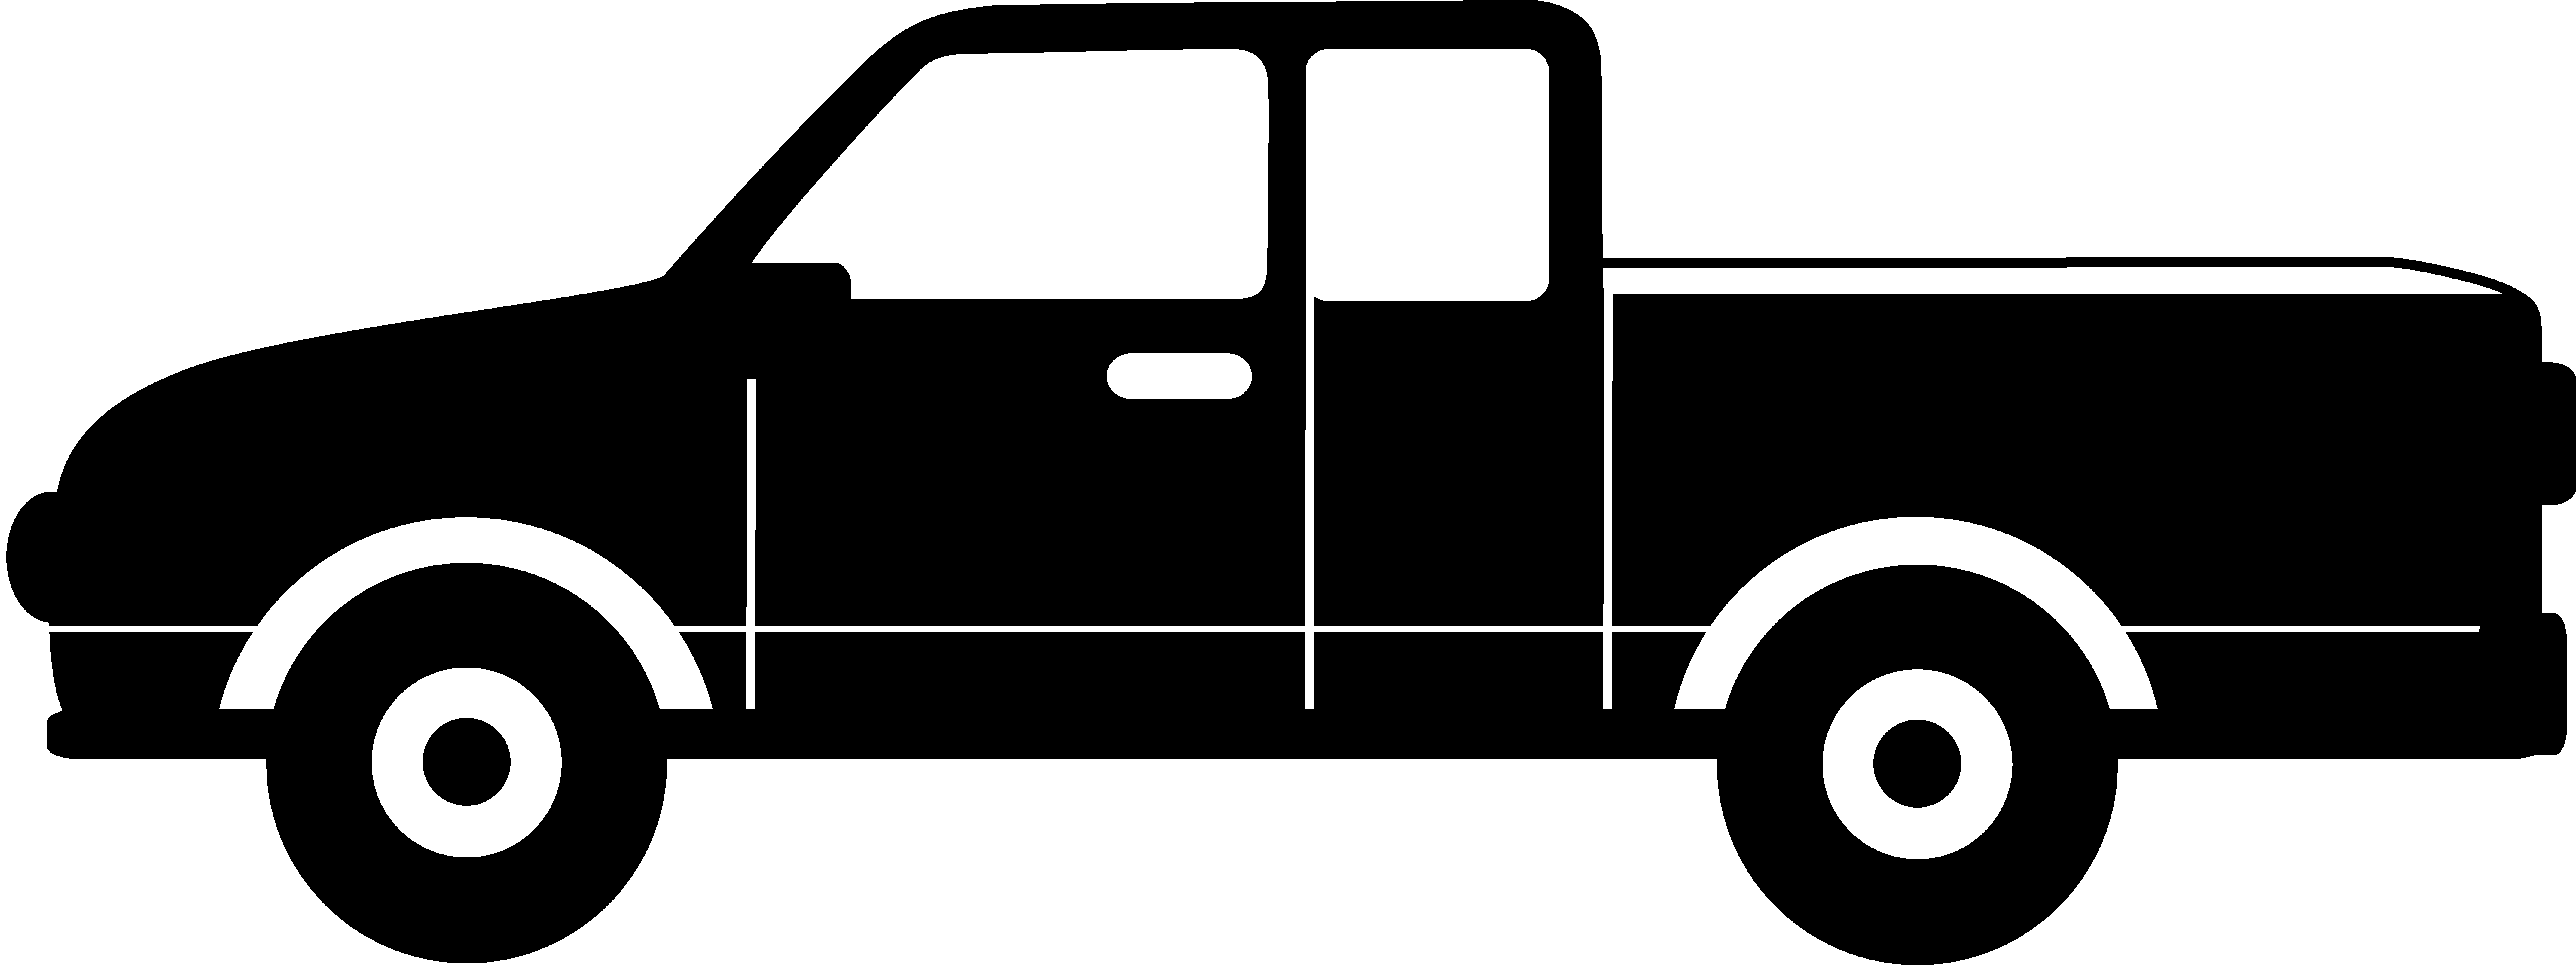 Pickup Truck Clipart Outline | Clipart Panda - Free Clipart Images